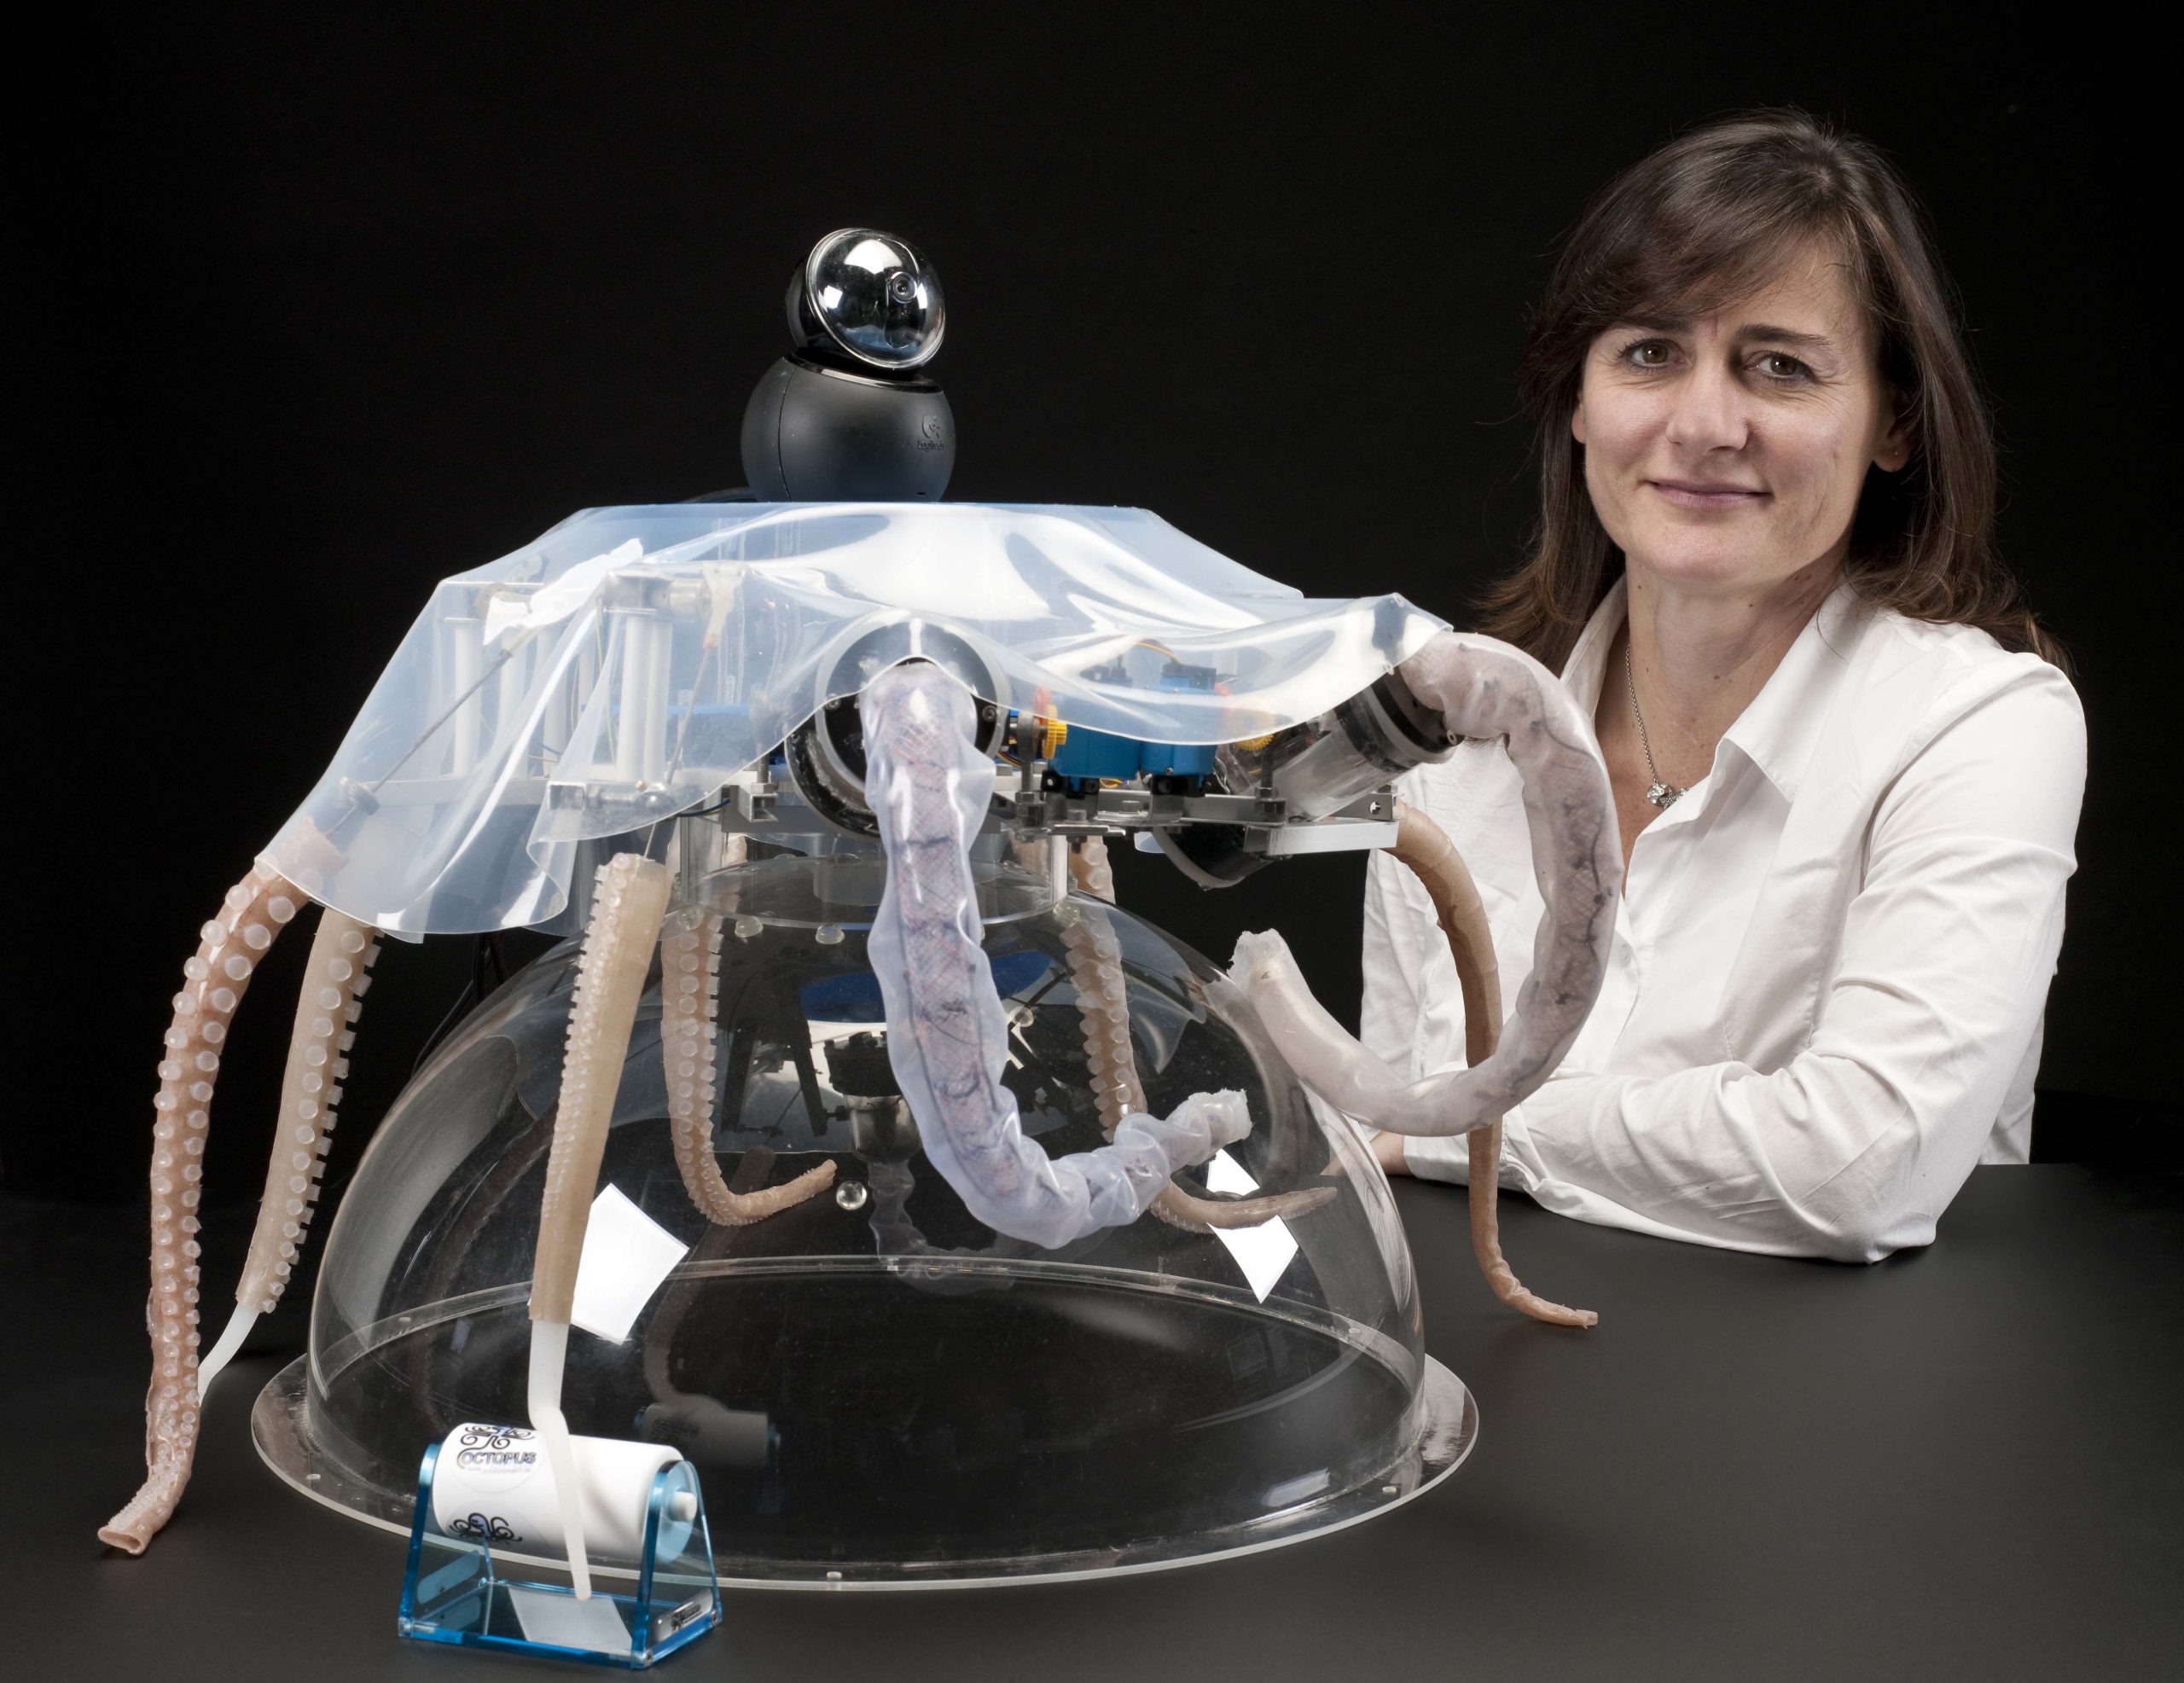 One of Prof Cecilia Laschi’s passions is studying how the octopus can help inspire more advanced and capable soft robots (Photo credit: Jennie Hills, The Science Museum, London)